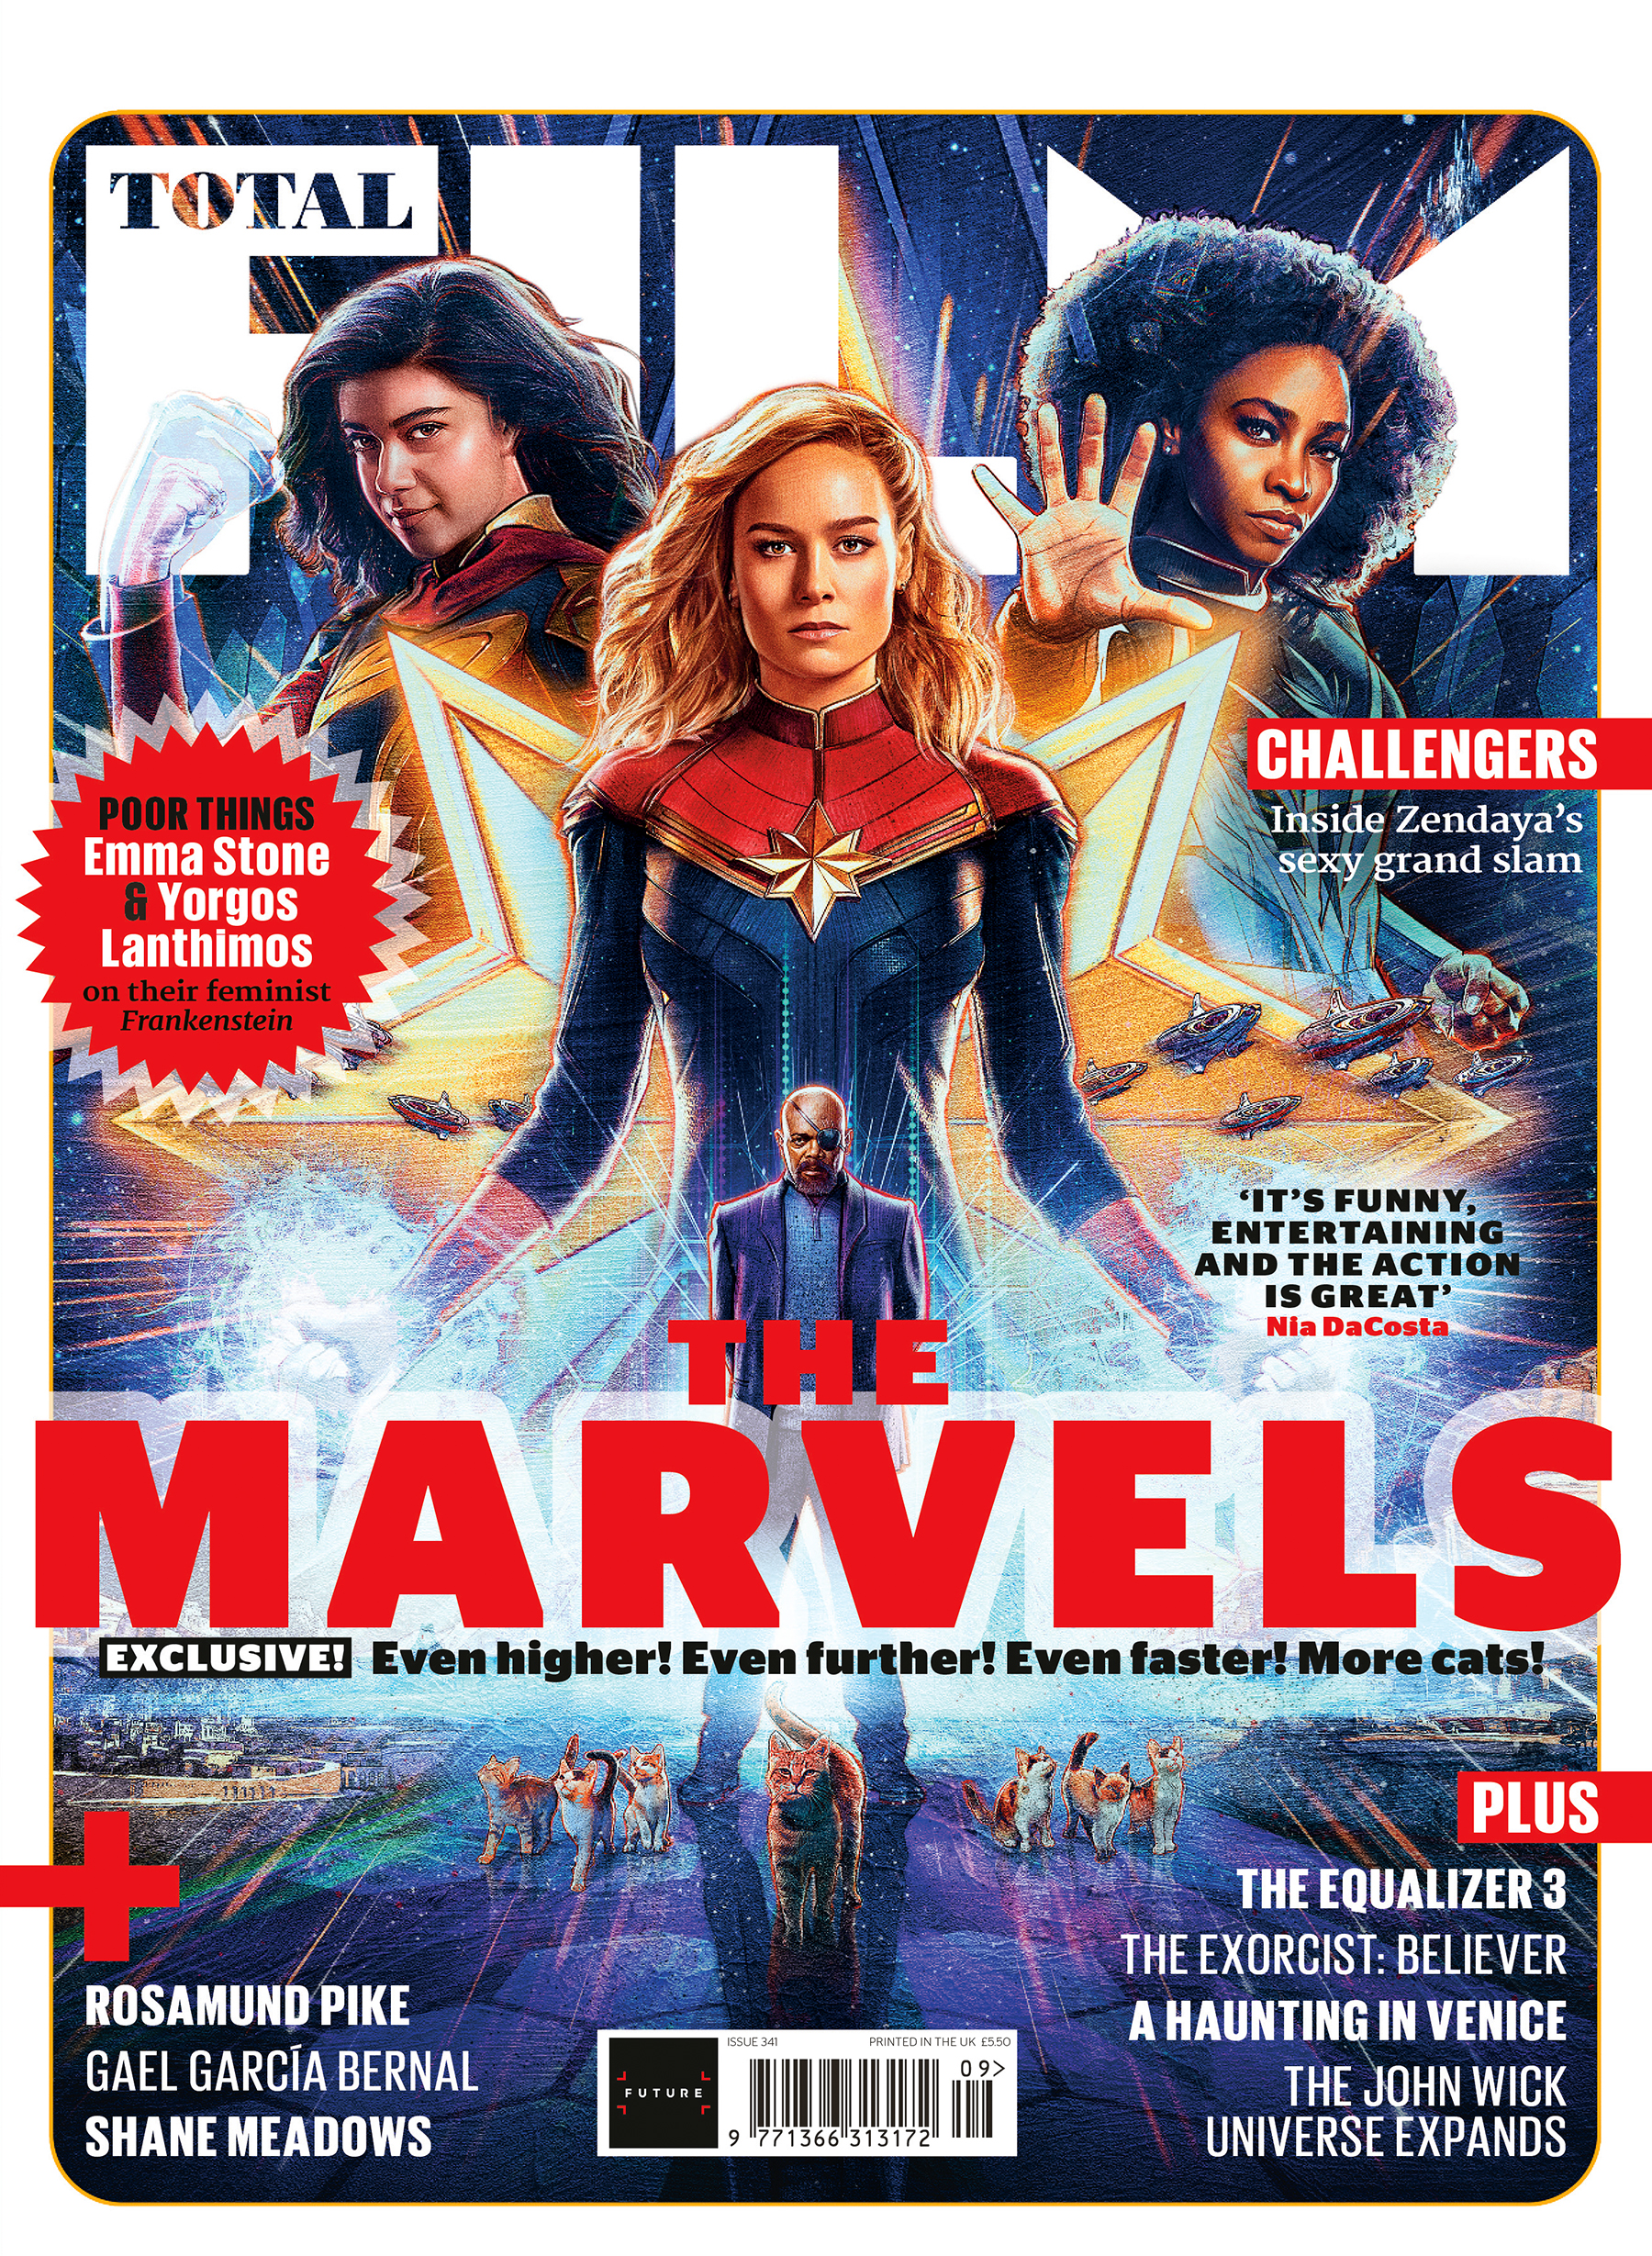 Total Film covers